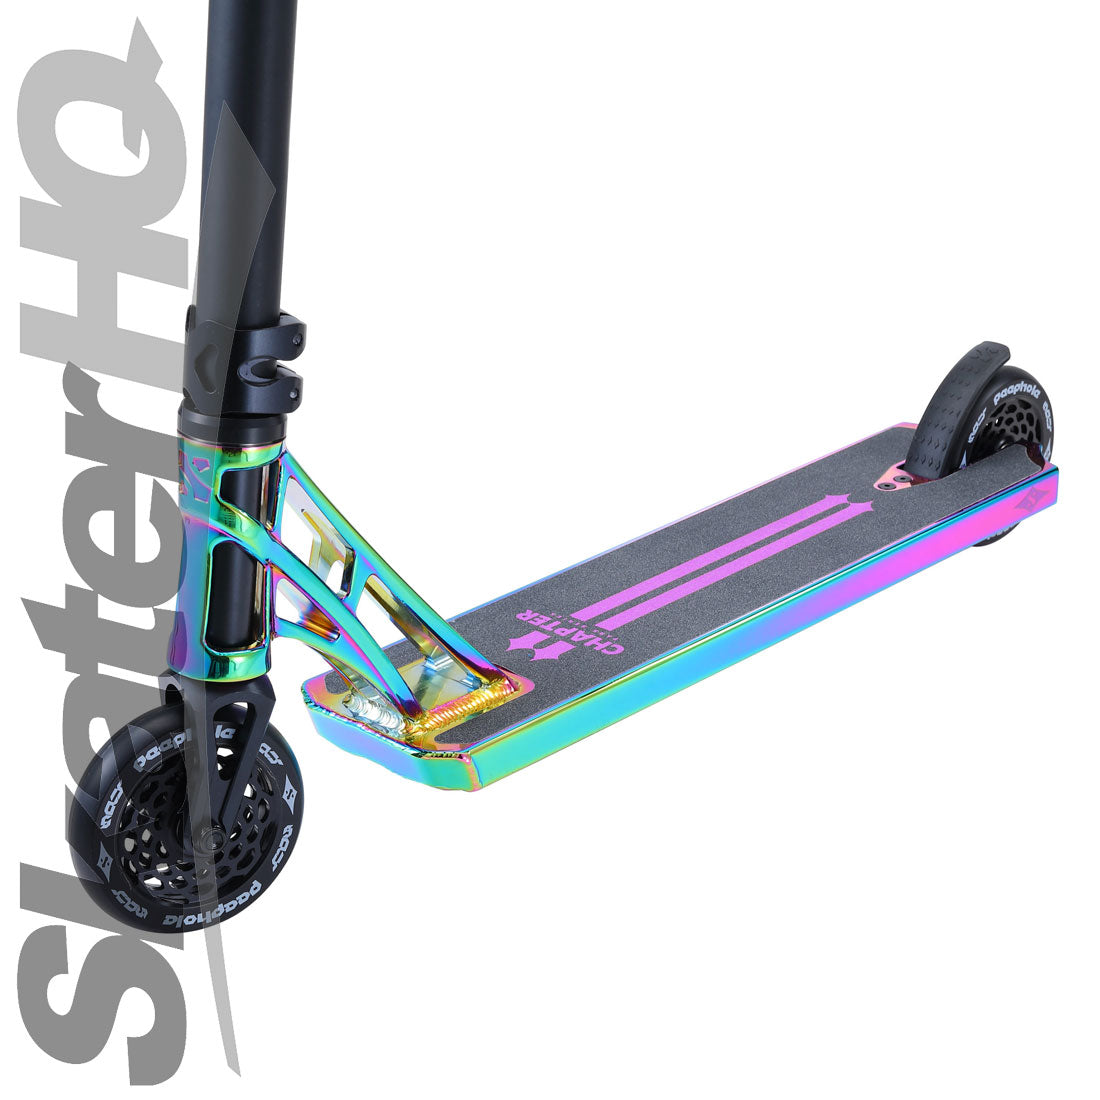 Sacrifice Chapter 2 Park Complete - Neochrome Scooter Completes Trick